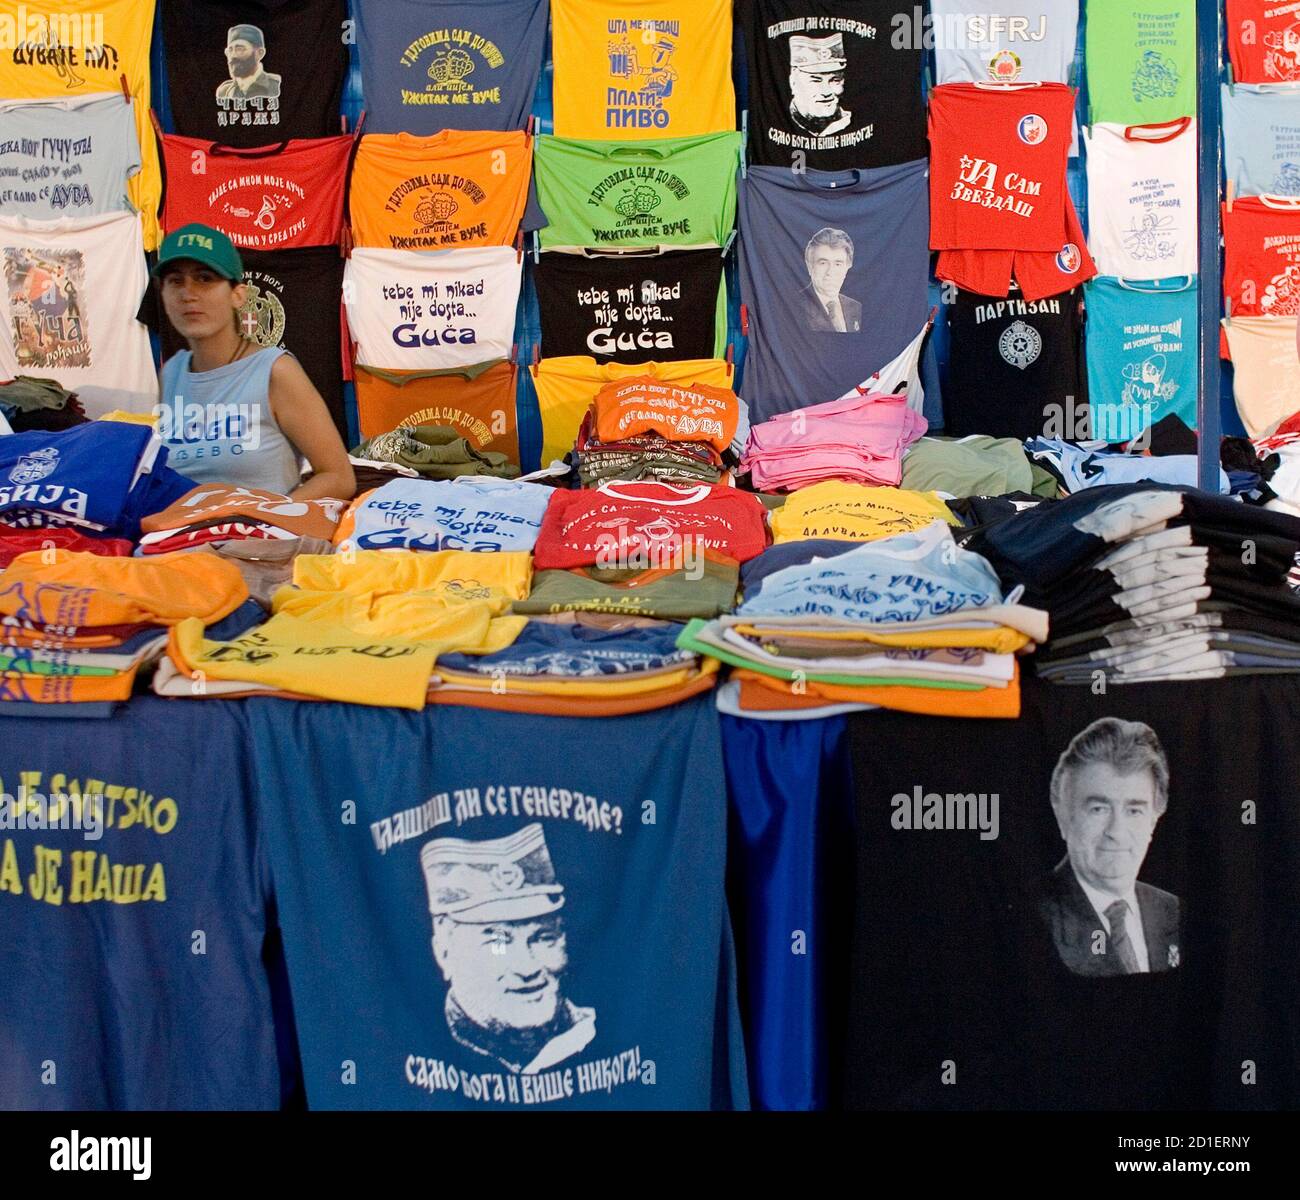 T-shirts with pictures of war crime fugitive General Ratko Mladic and  Bosnian Serb Radovan Karadzic are sold at the 47th annual brass band  festival in the Serbian village of Guca, some 160